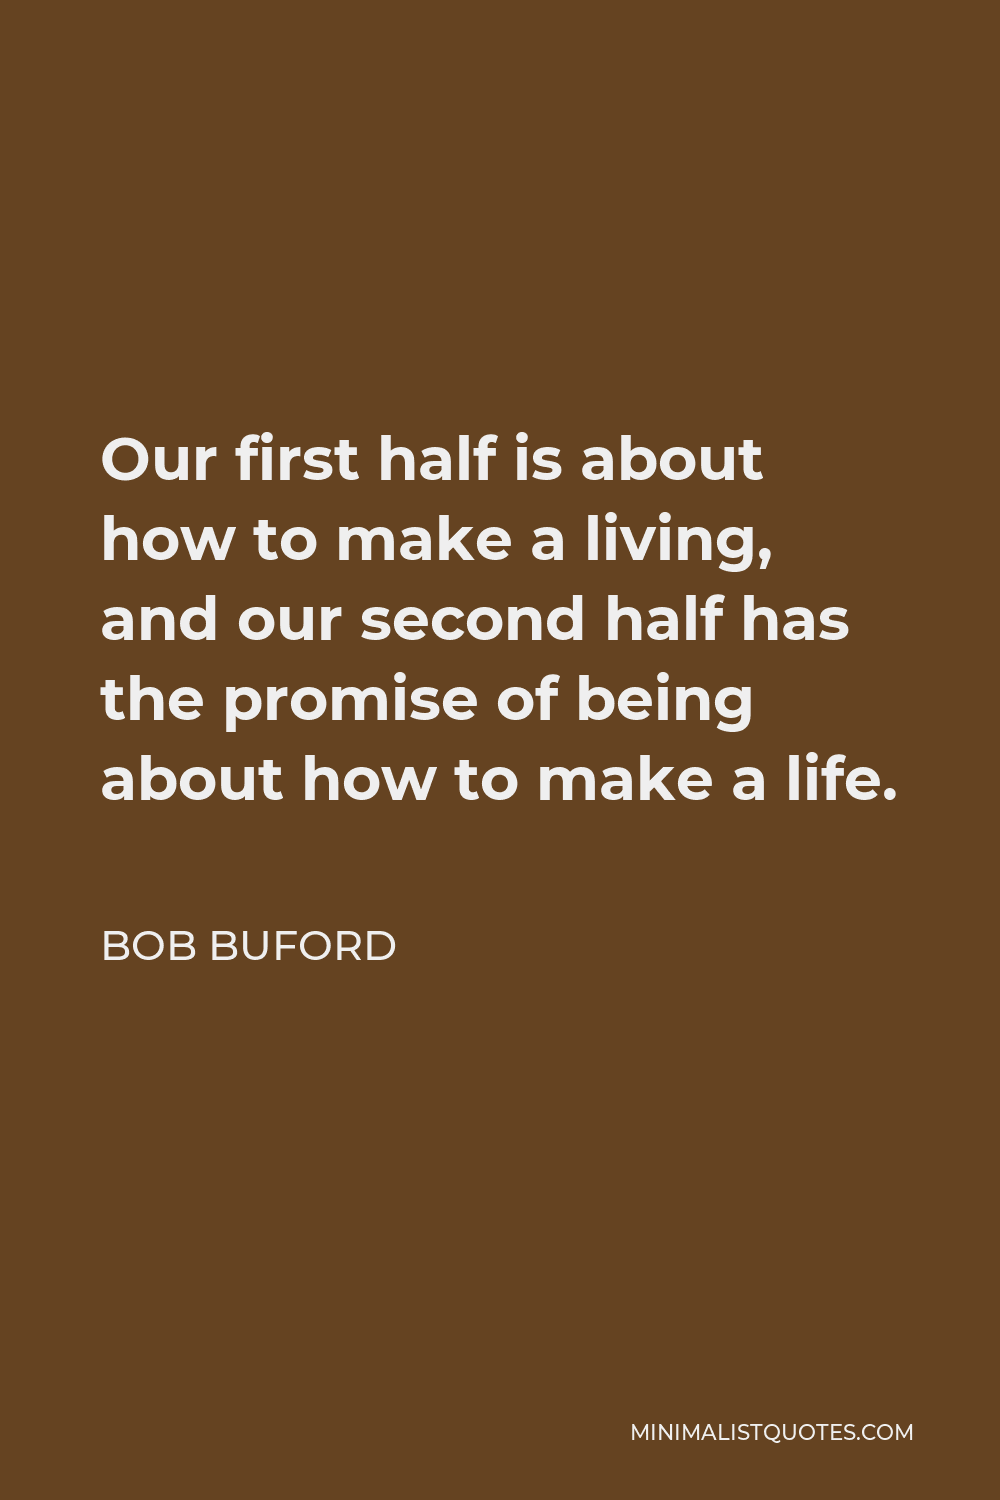 Bob Buford Quote - Our first half is about how to make a living, and our second half has the promise of being about how to make a life.